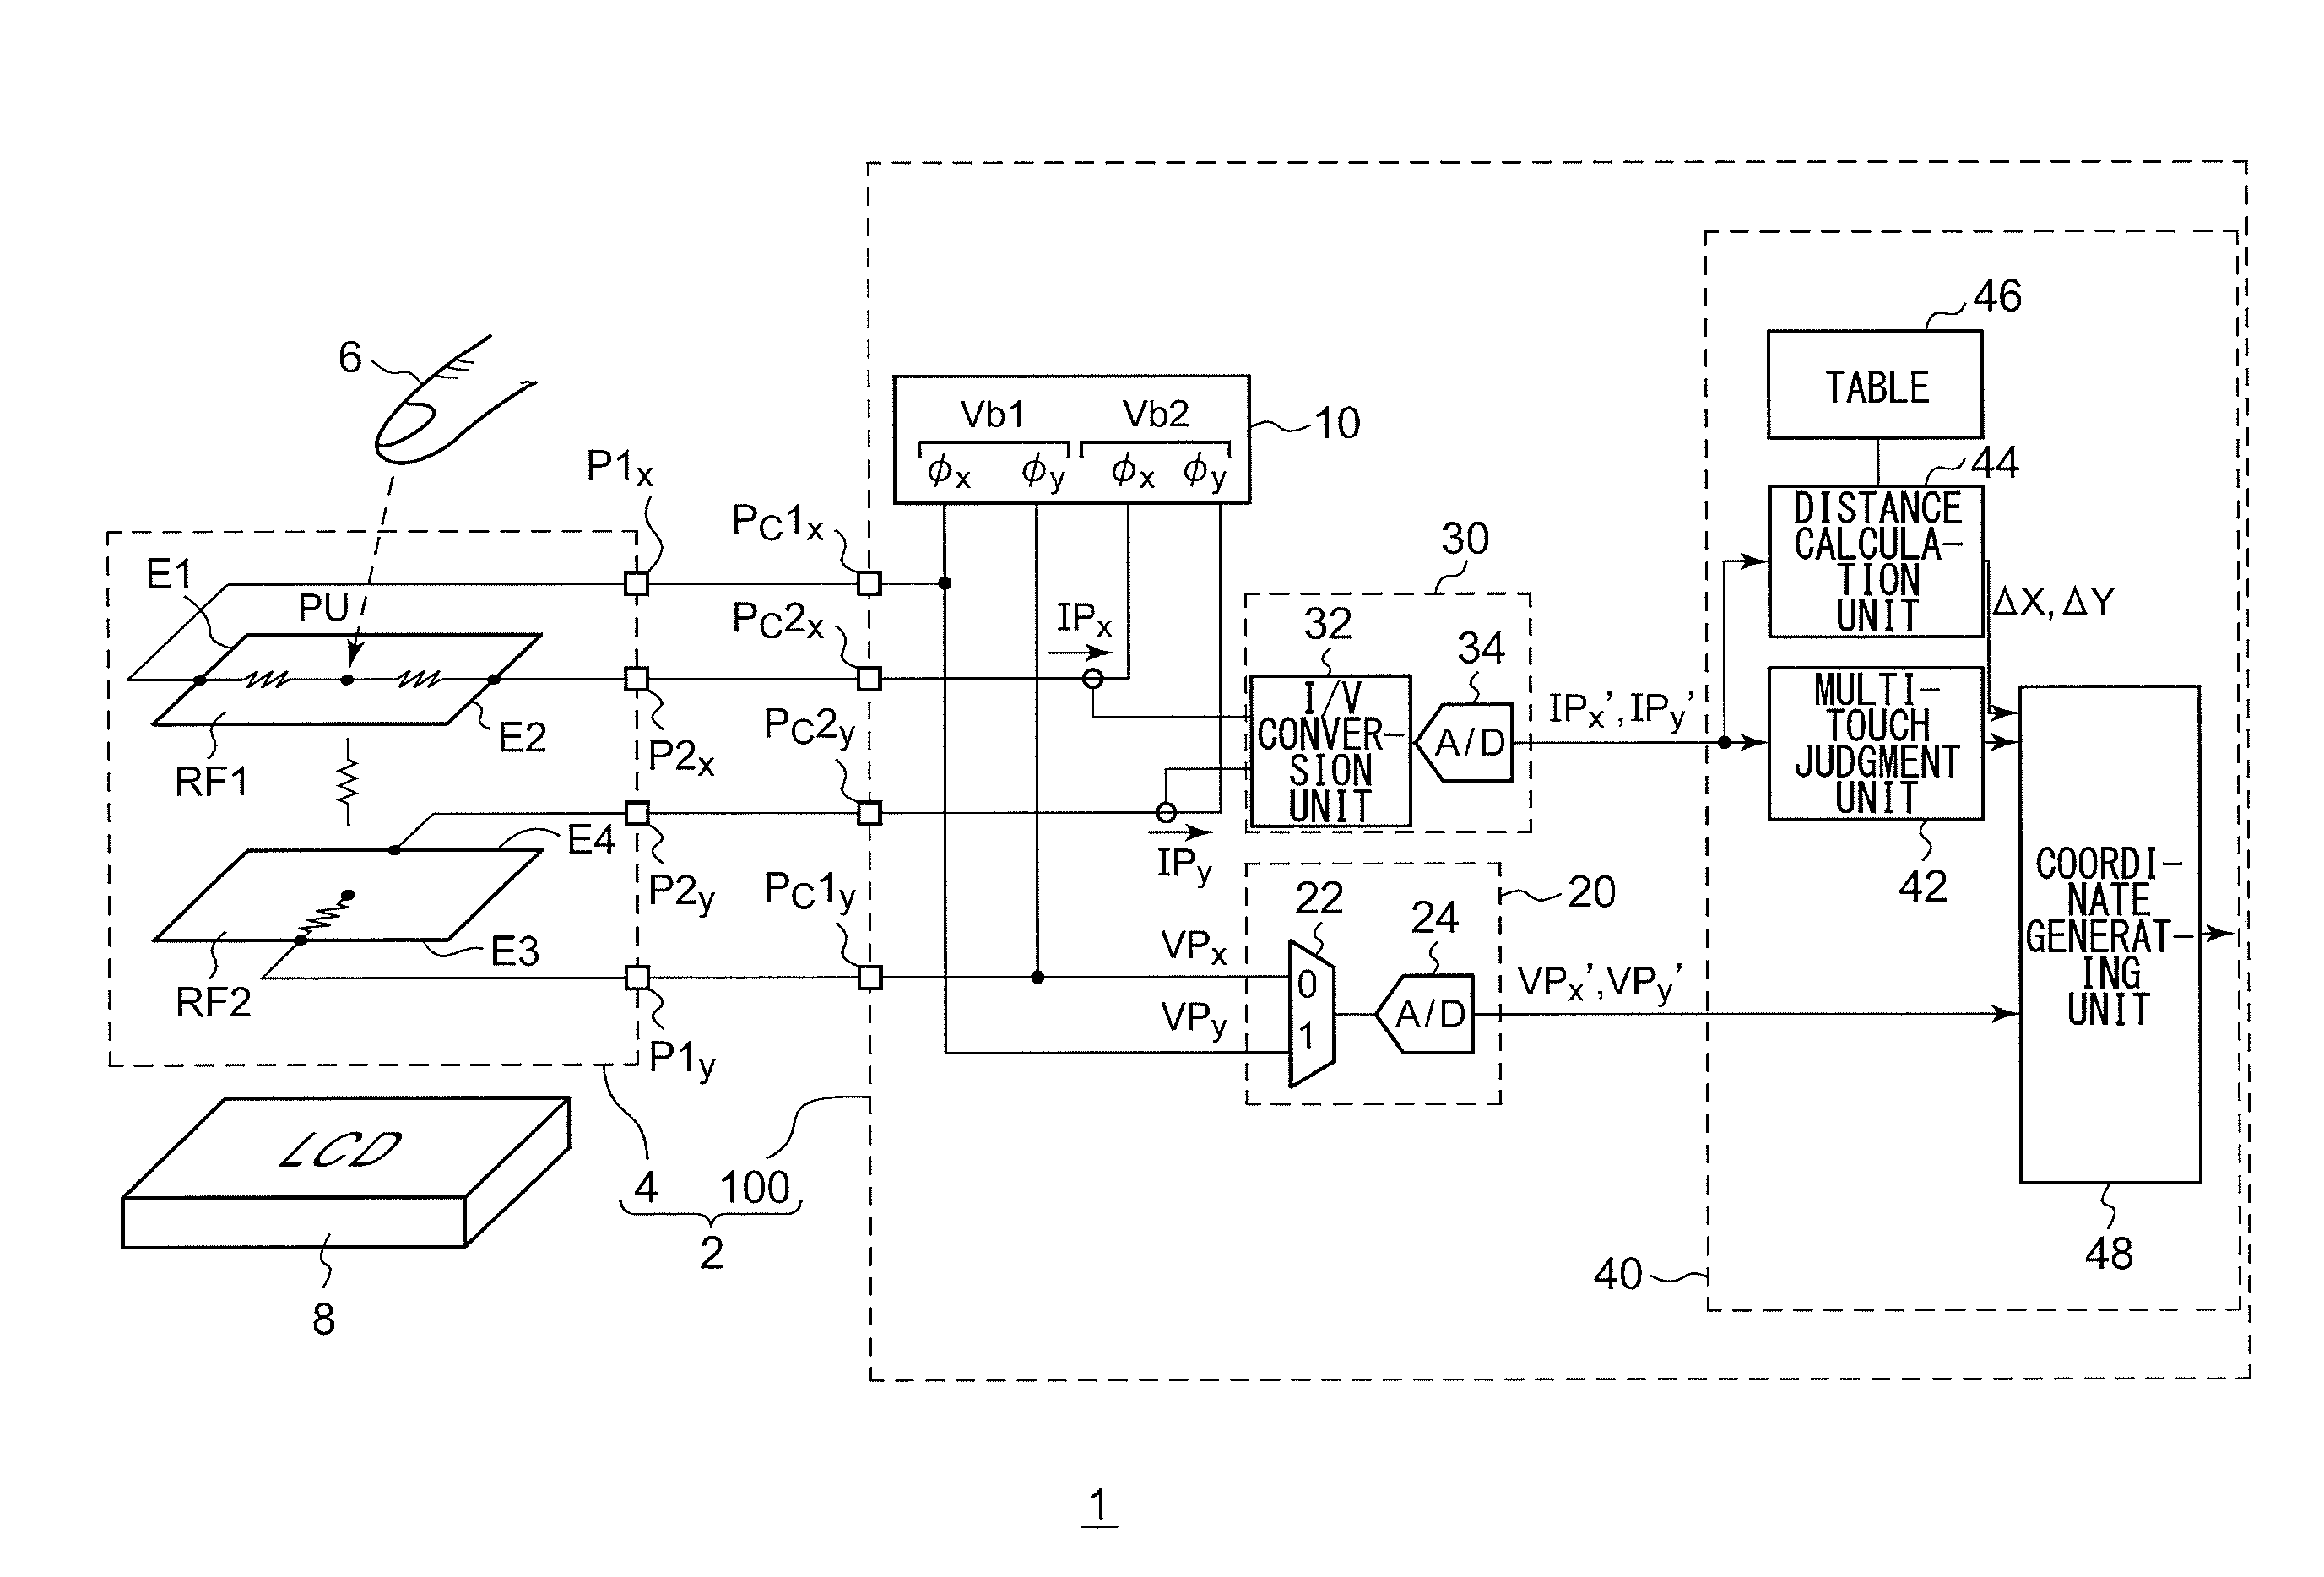 Touch panel control circuit